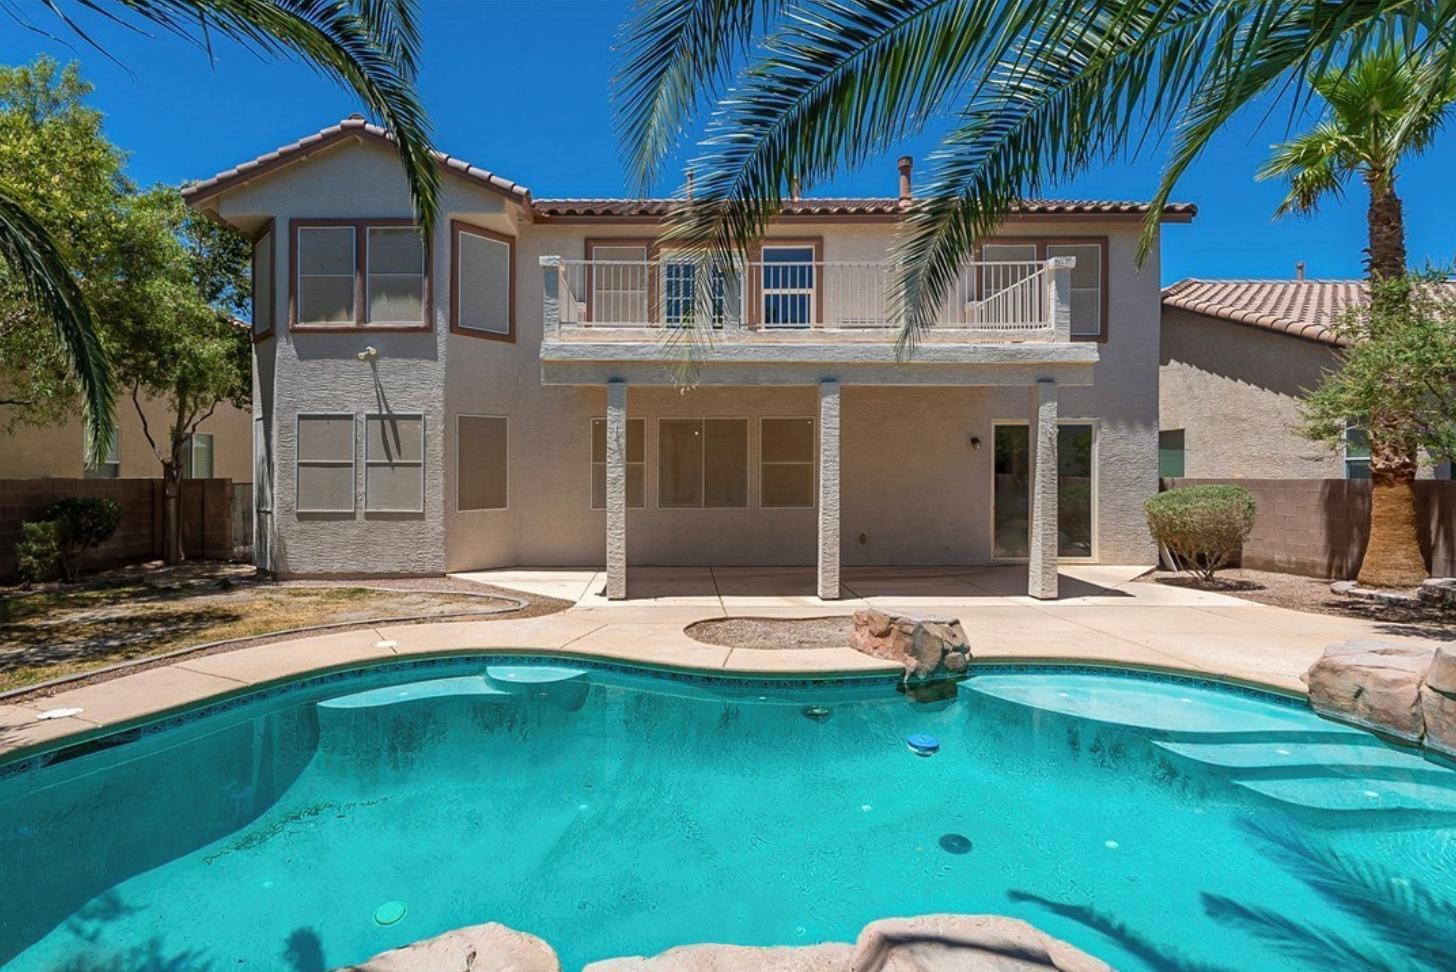 A two story home with a large balcony, covered patio, and resort-style pool area with palm trees